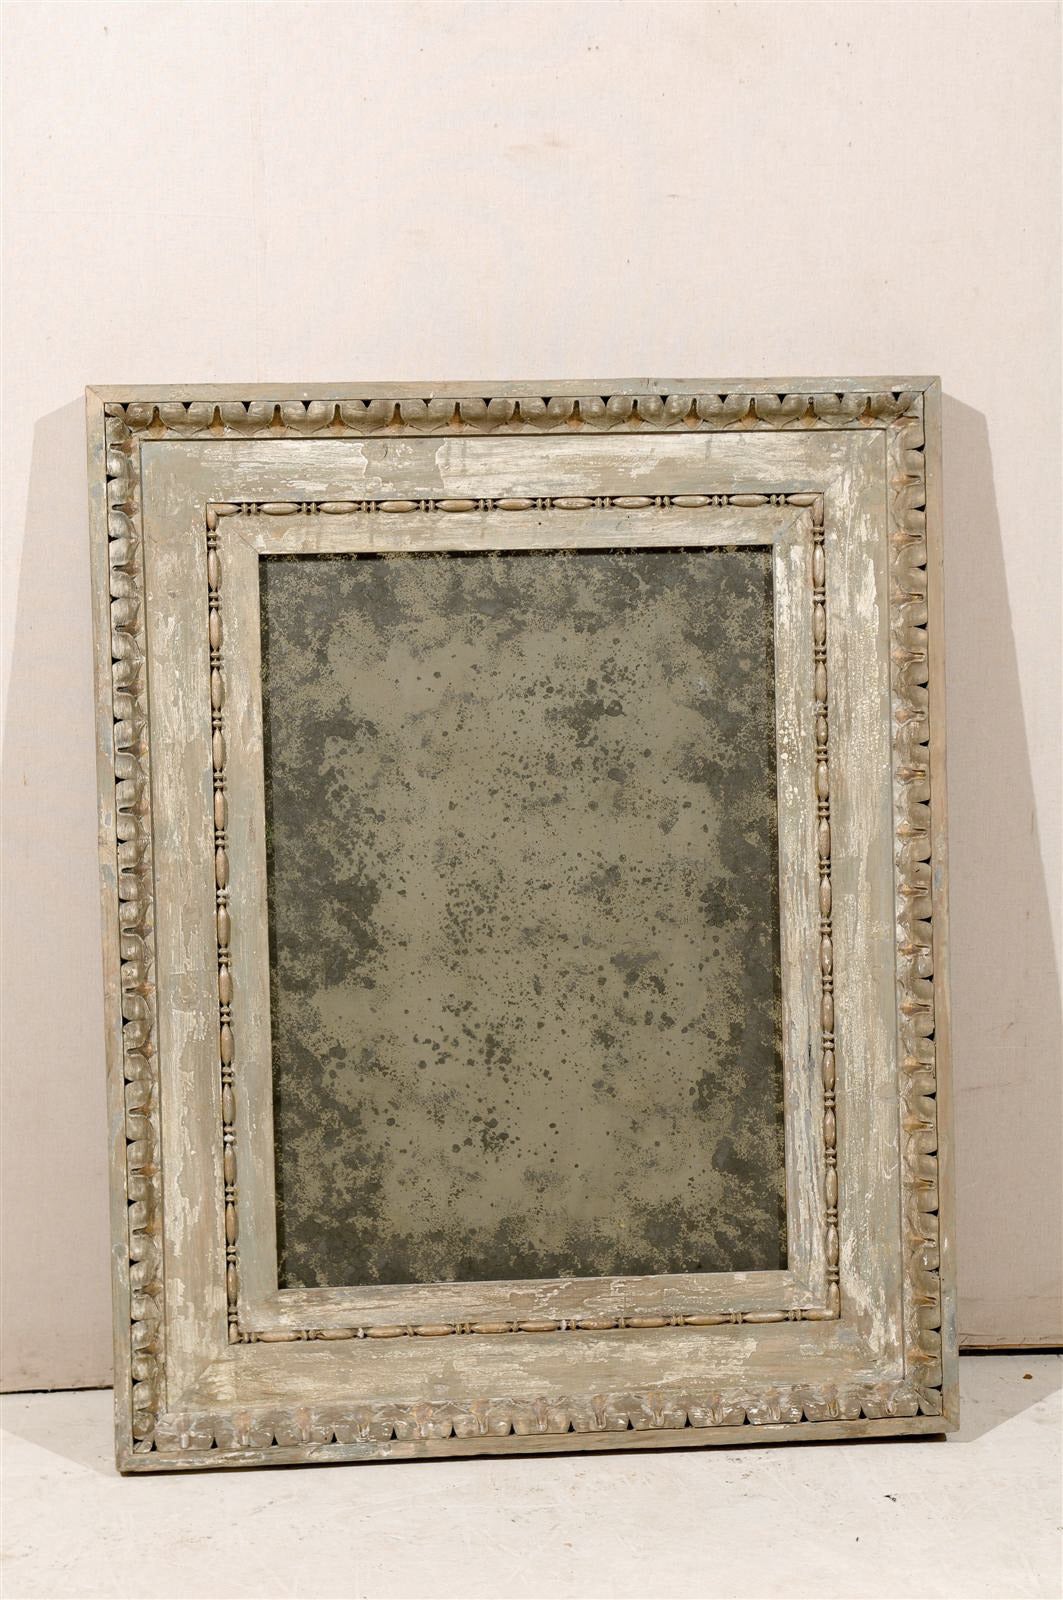 An Italian Early 19th Century Wood Carved Mirror with Richly Carved Molding (Including the 